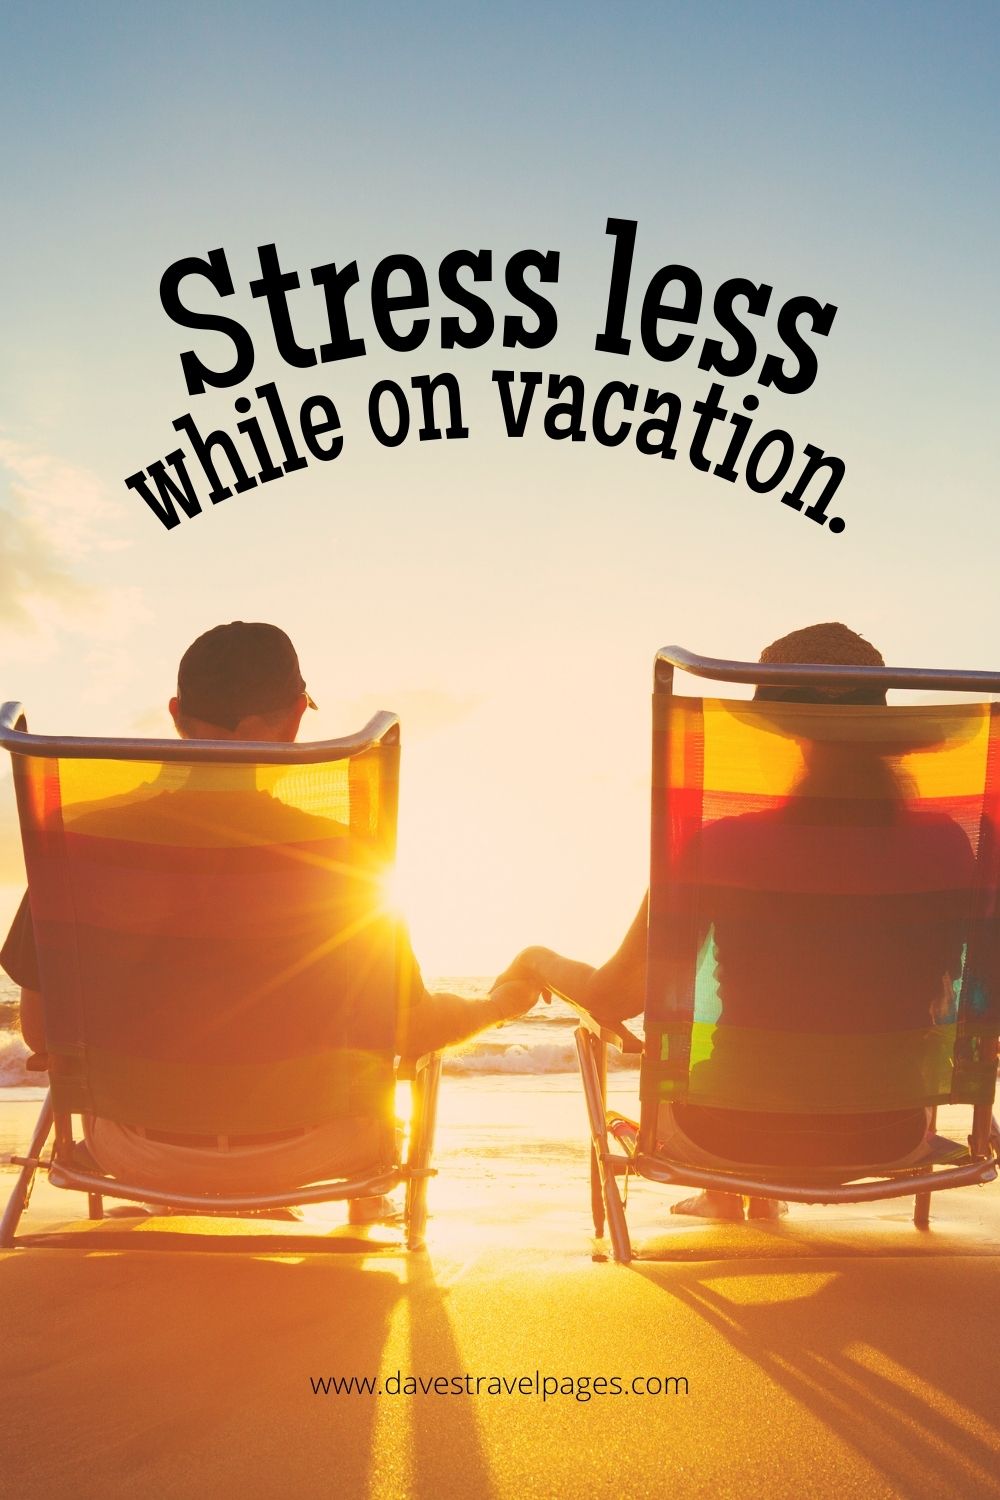 Stress less while on vacation caption for instagram